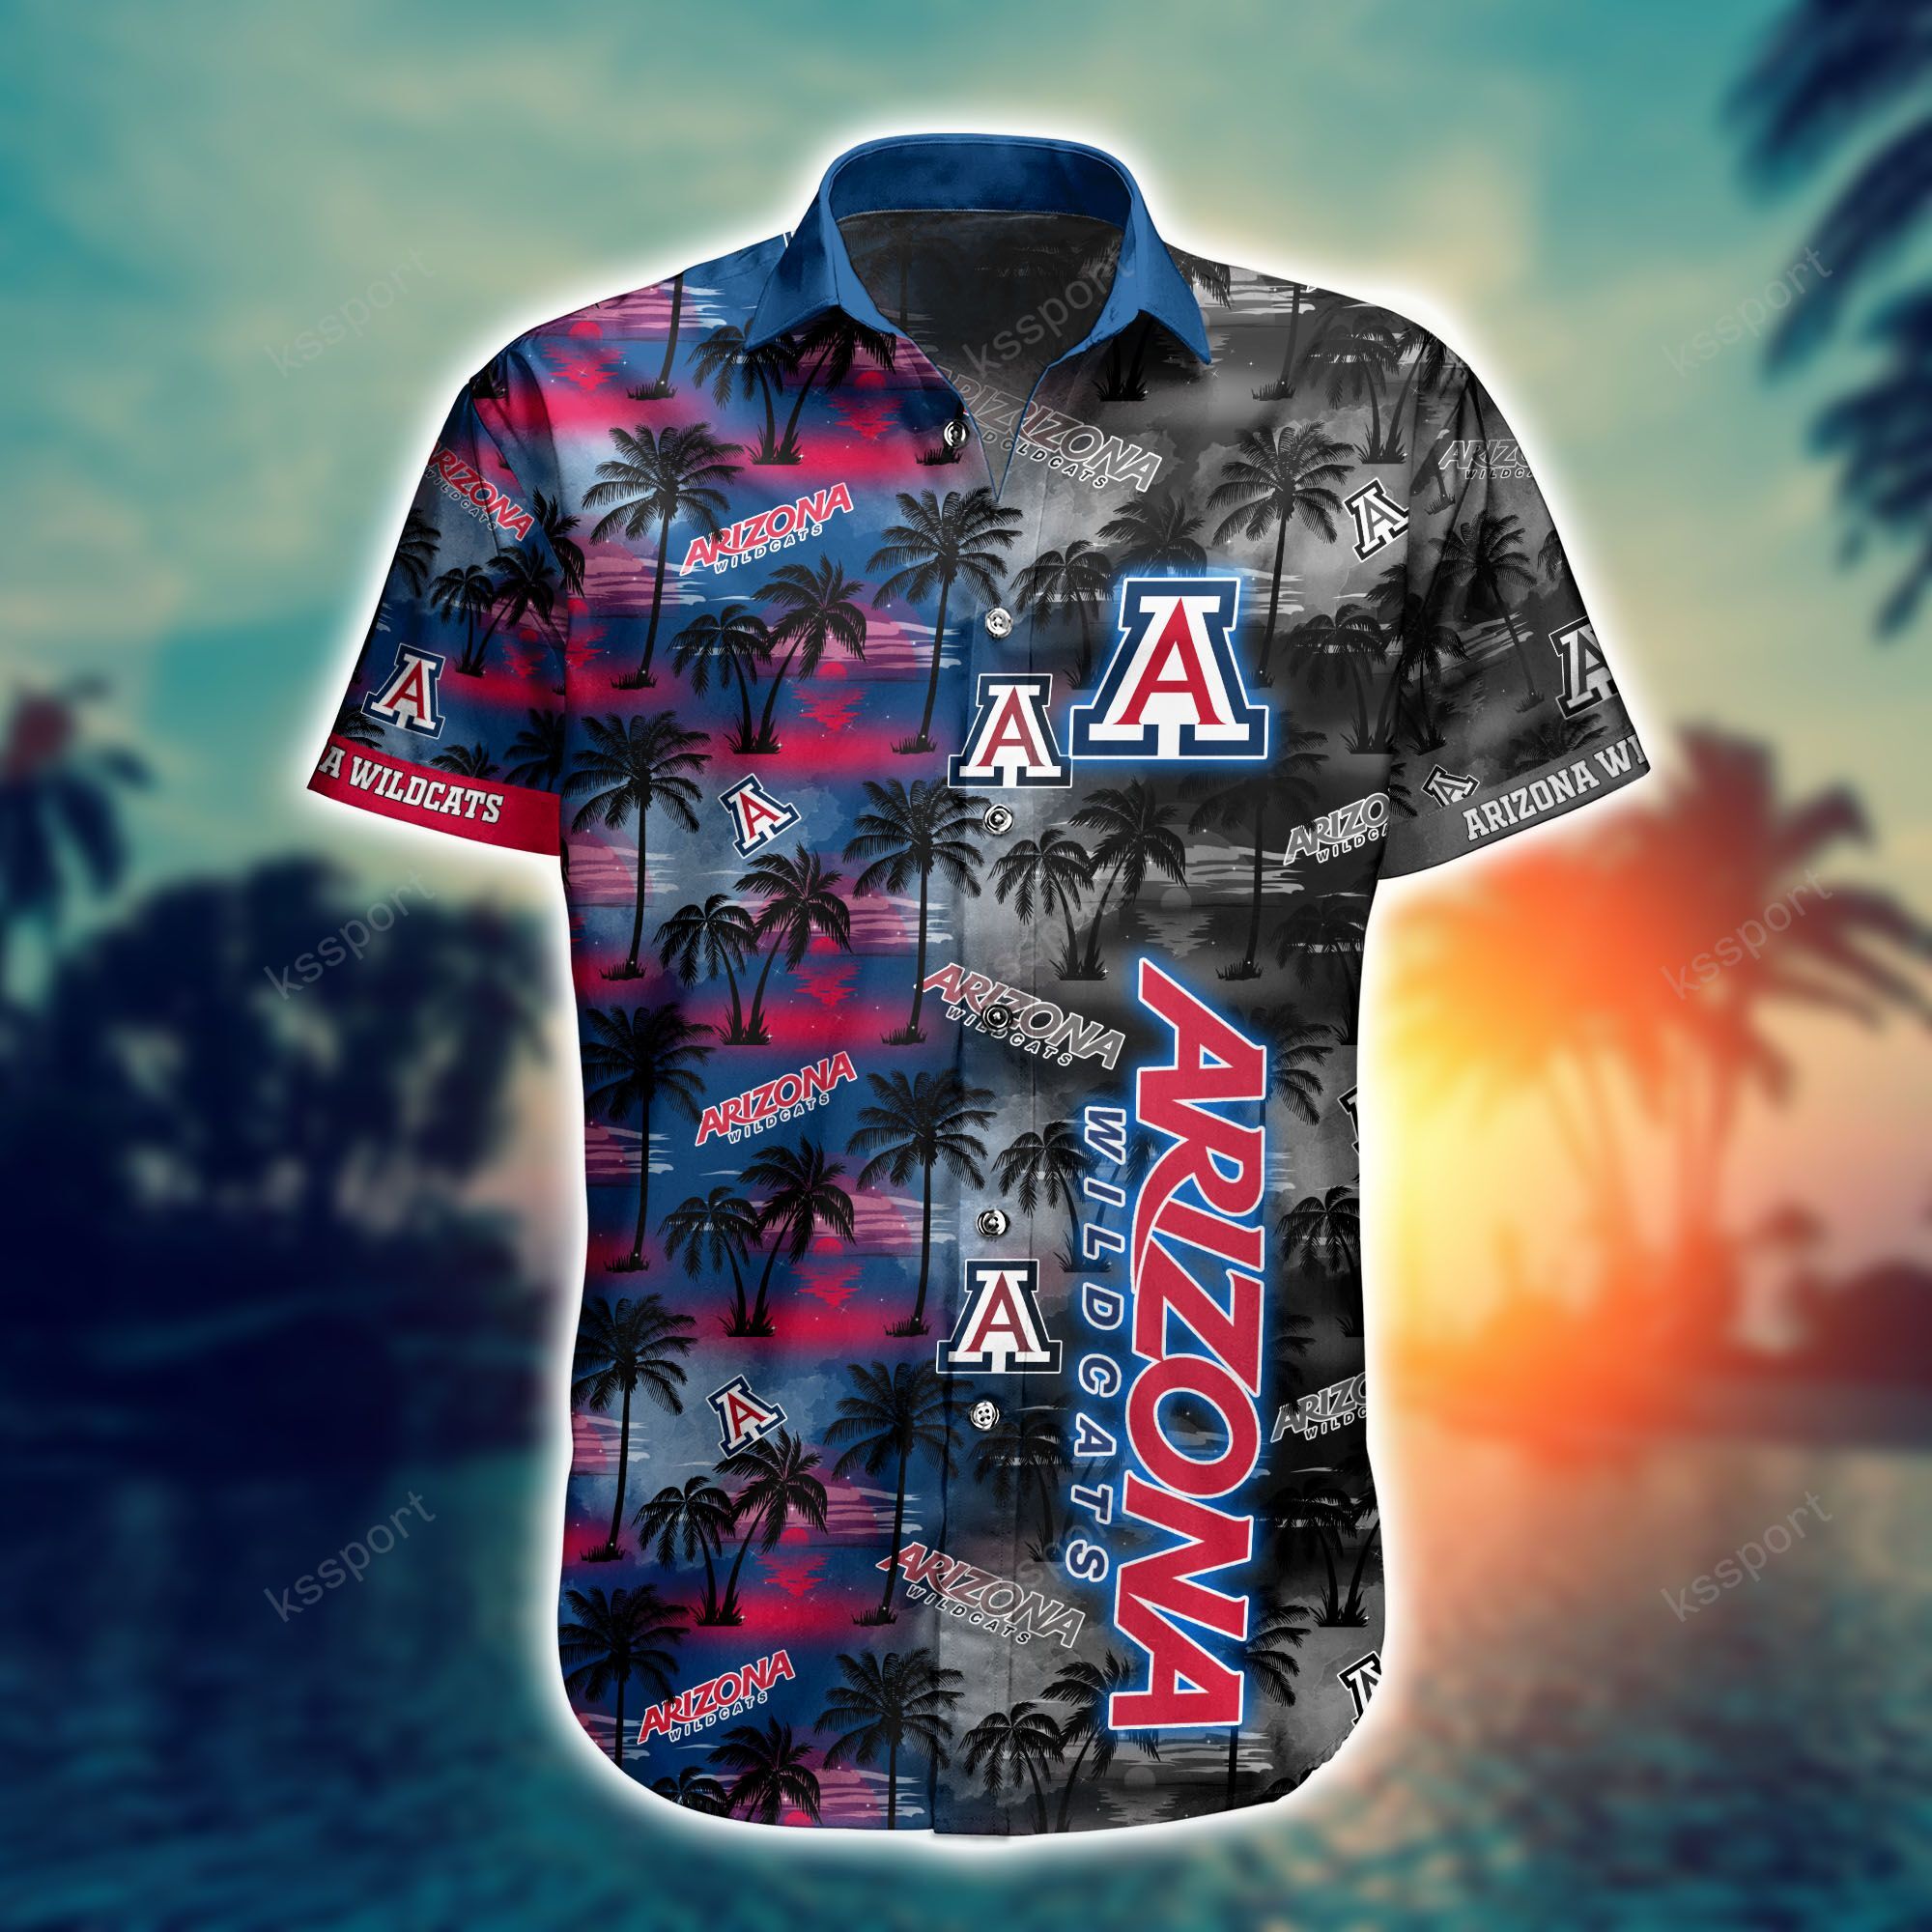 Top cool Hawaiian shirt 2022 - Make sure you get yours today before they run out! 107